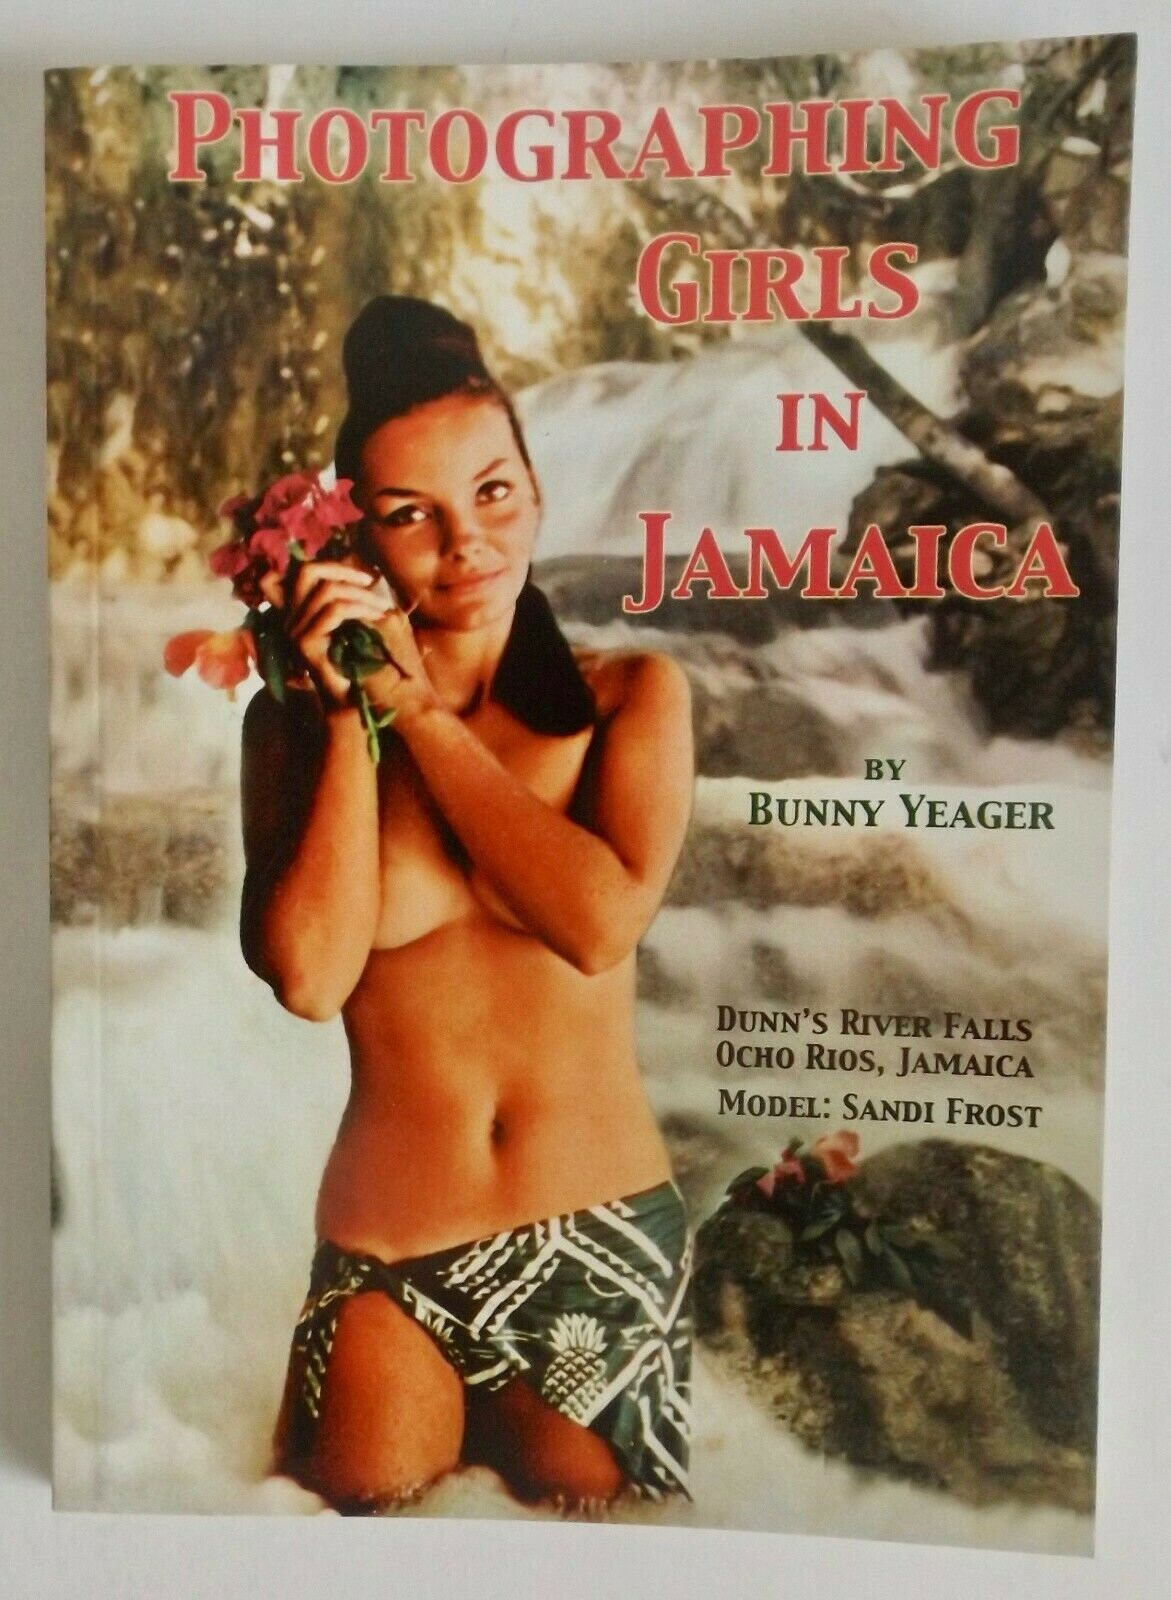 2003 Photographing Girls in Jamaica by Bunny Yeager Book